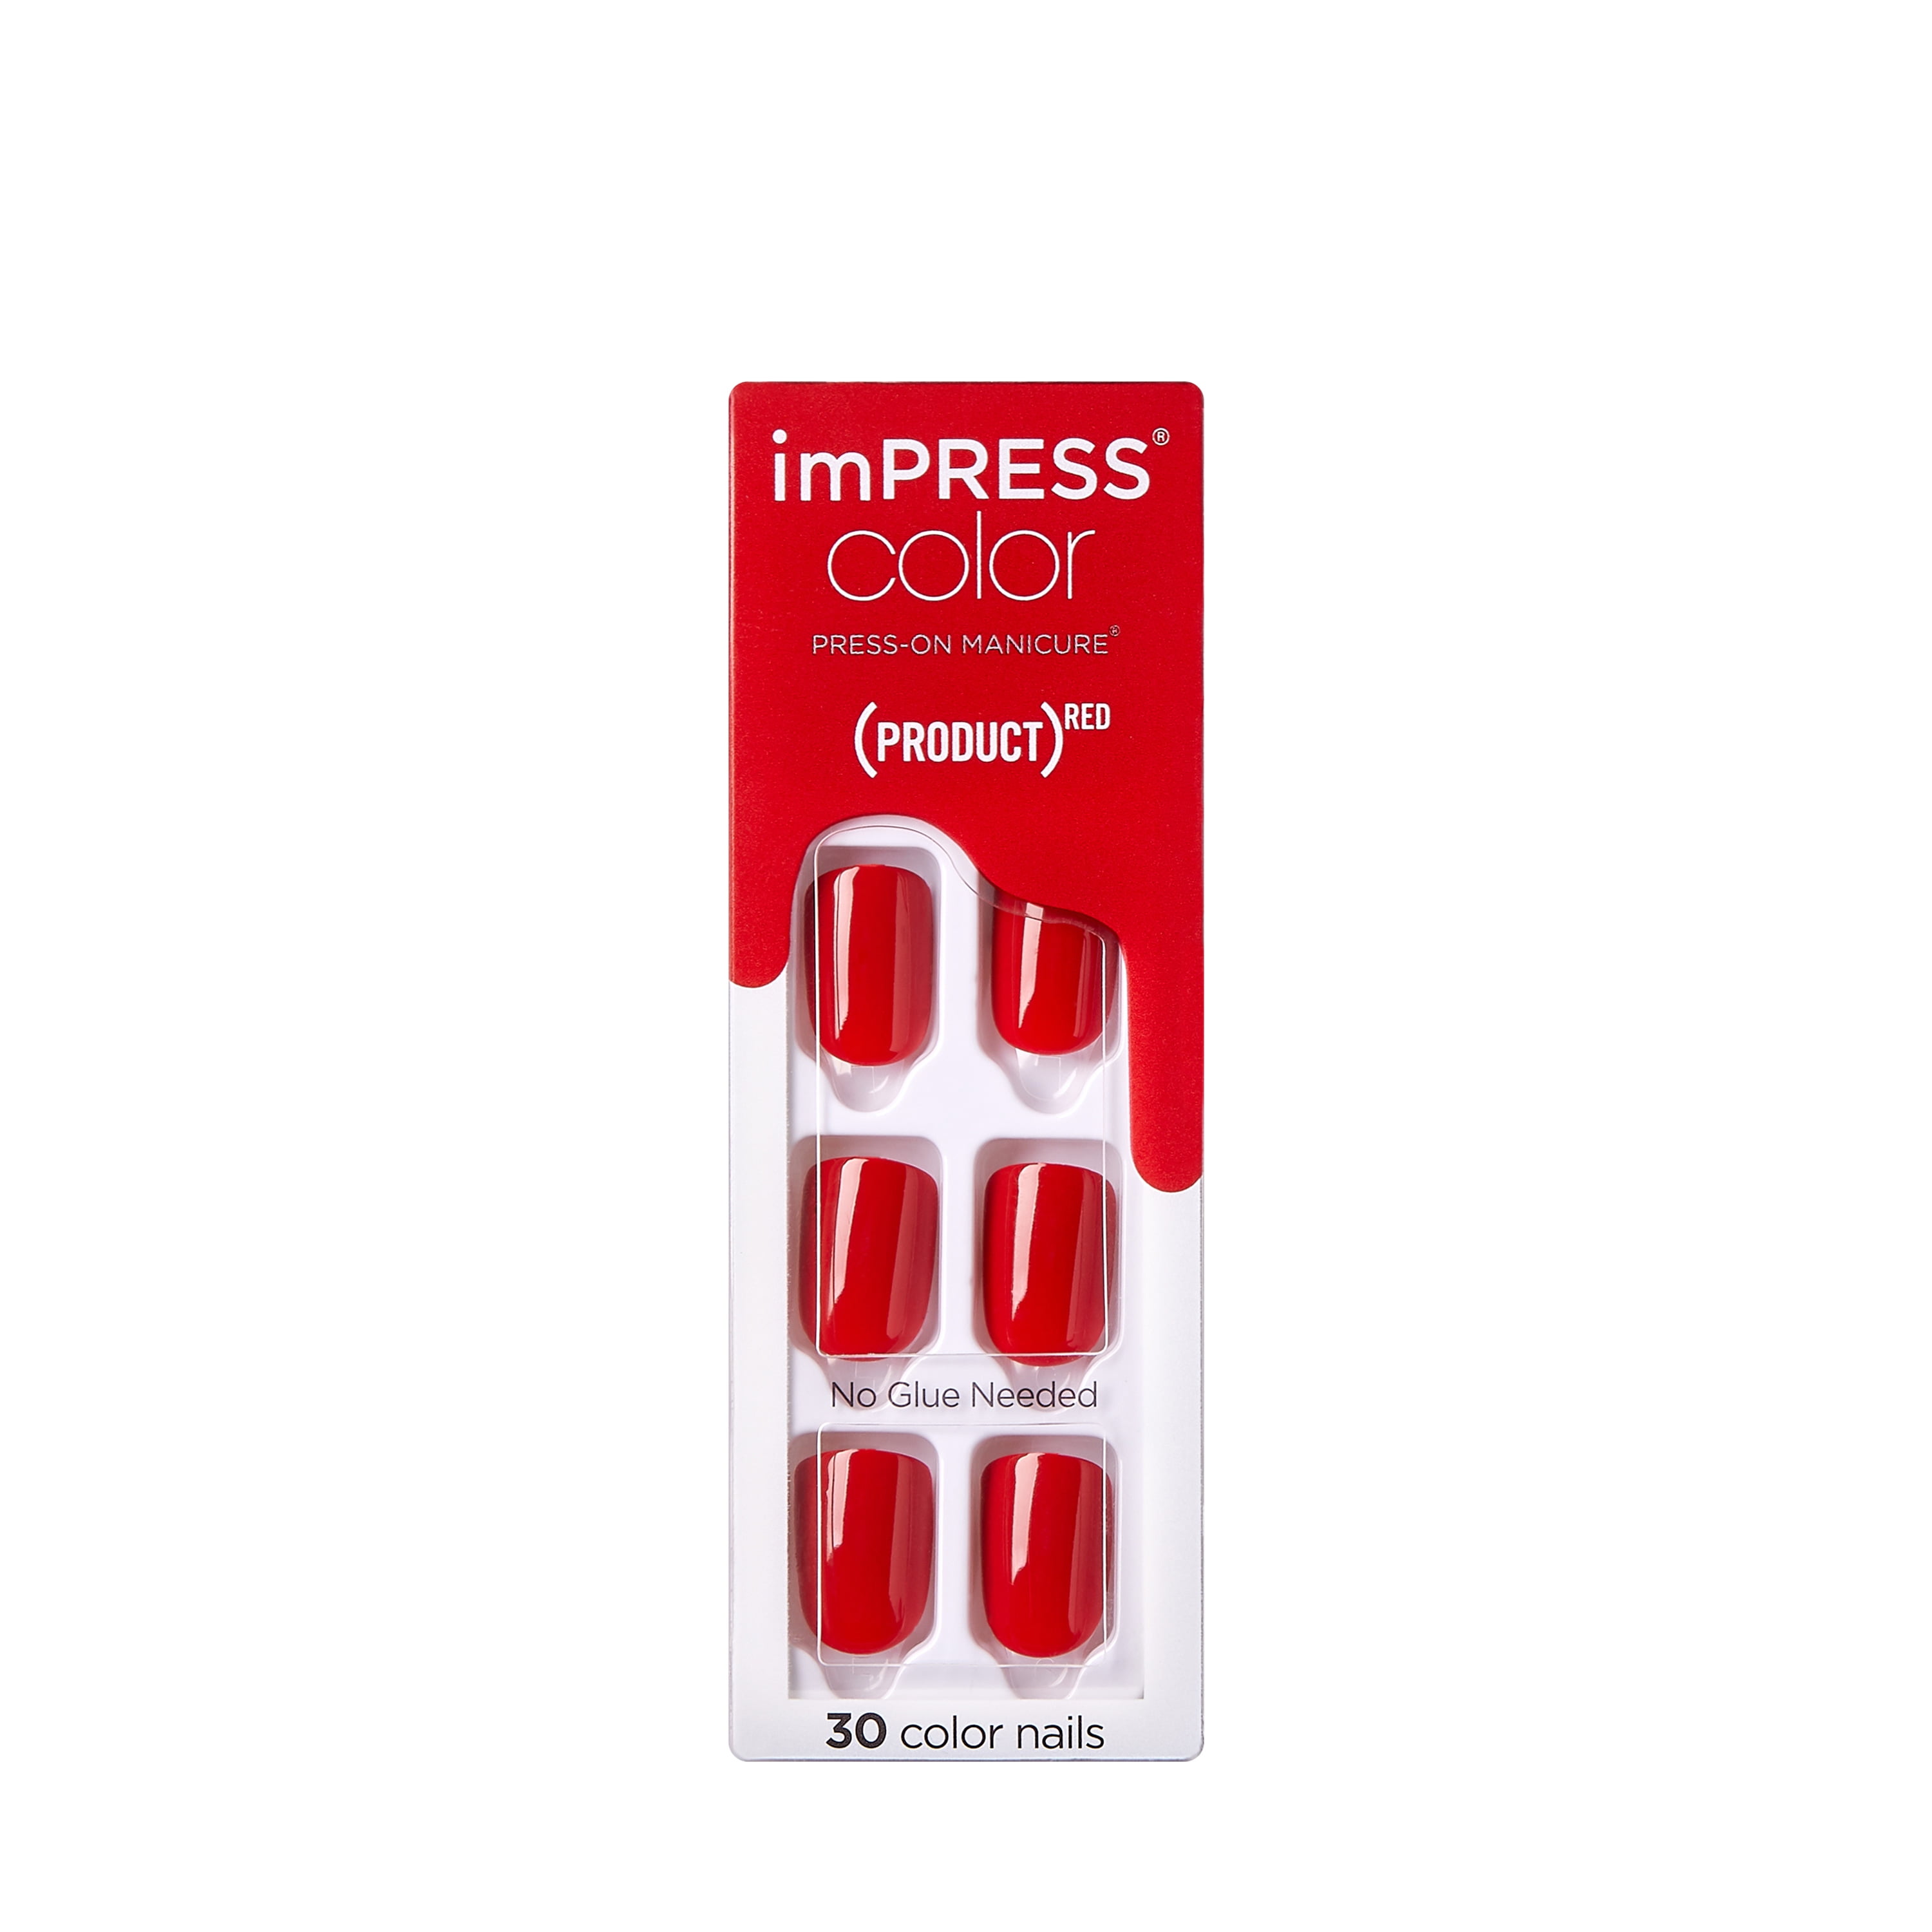 KISS imPRESS Color Press-On Nails, (Product)Red, ‘Red Impact’, 30 Count ...